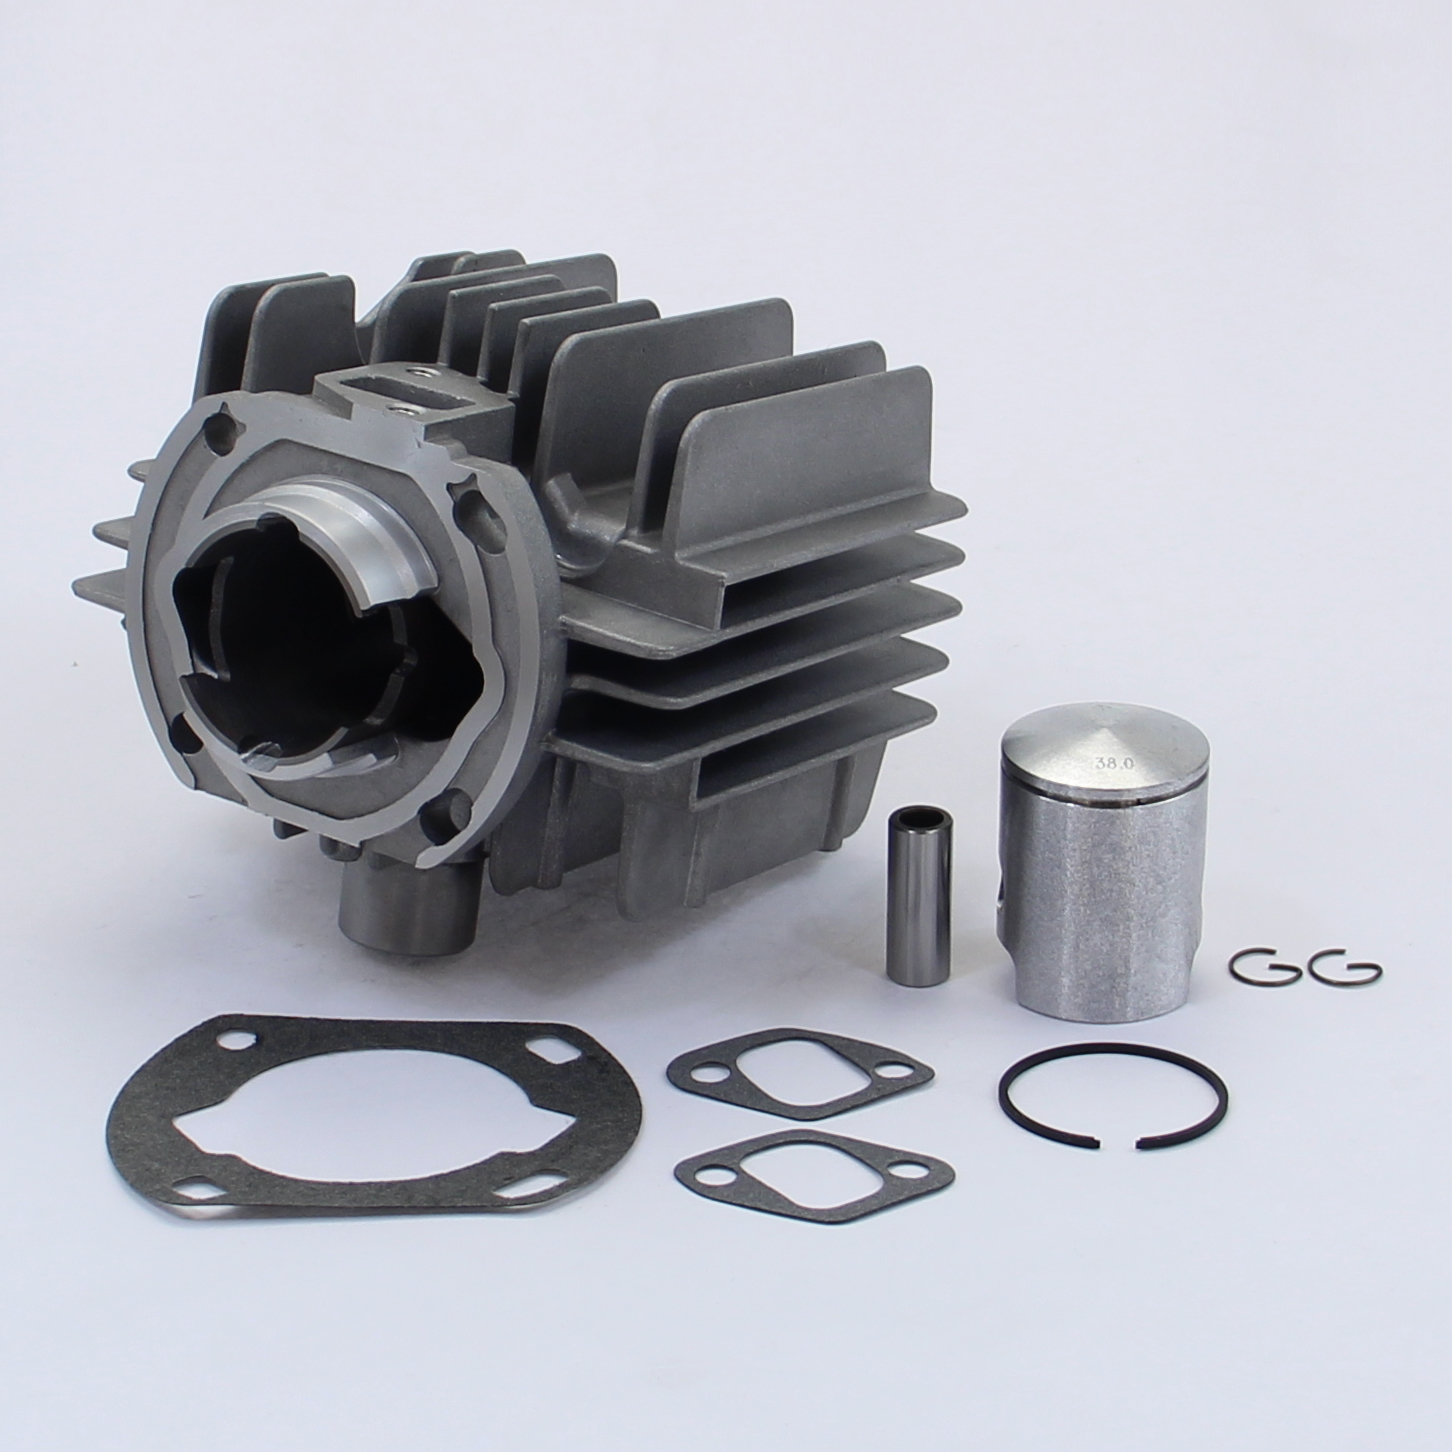 Cylinder kit 50cc 38mm for Hercules Optima / TUNING Prima M 2 3 4 5 Sachs  504 505 engine, Cylinders & Tuning Kits, Cylinder & Piston, Moped engine  parts, Moped parts